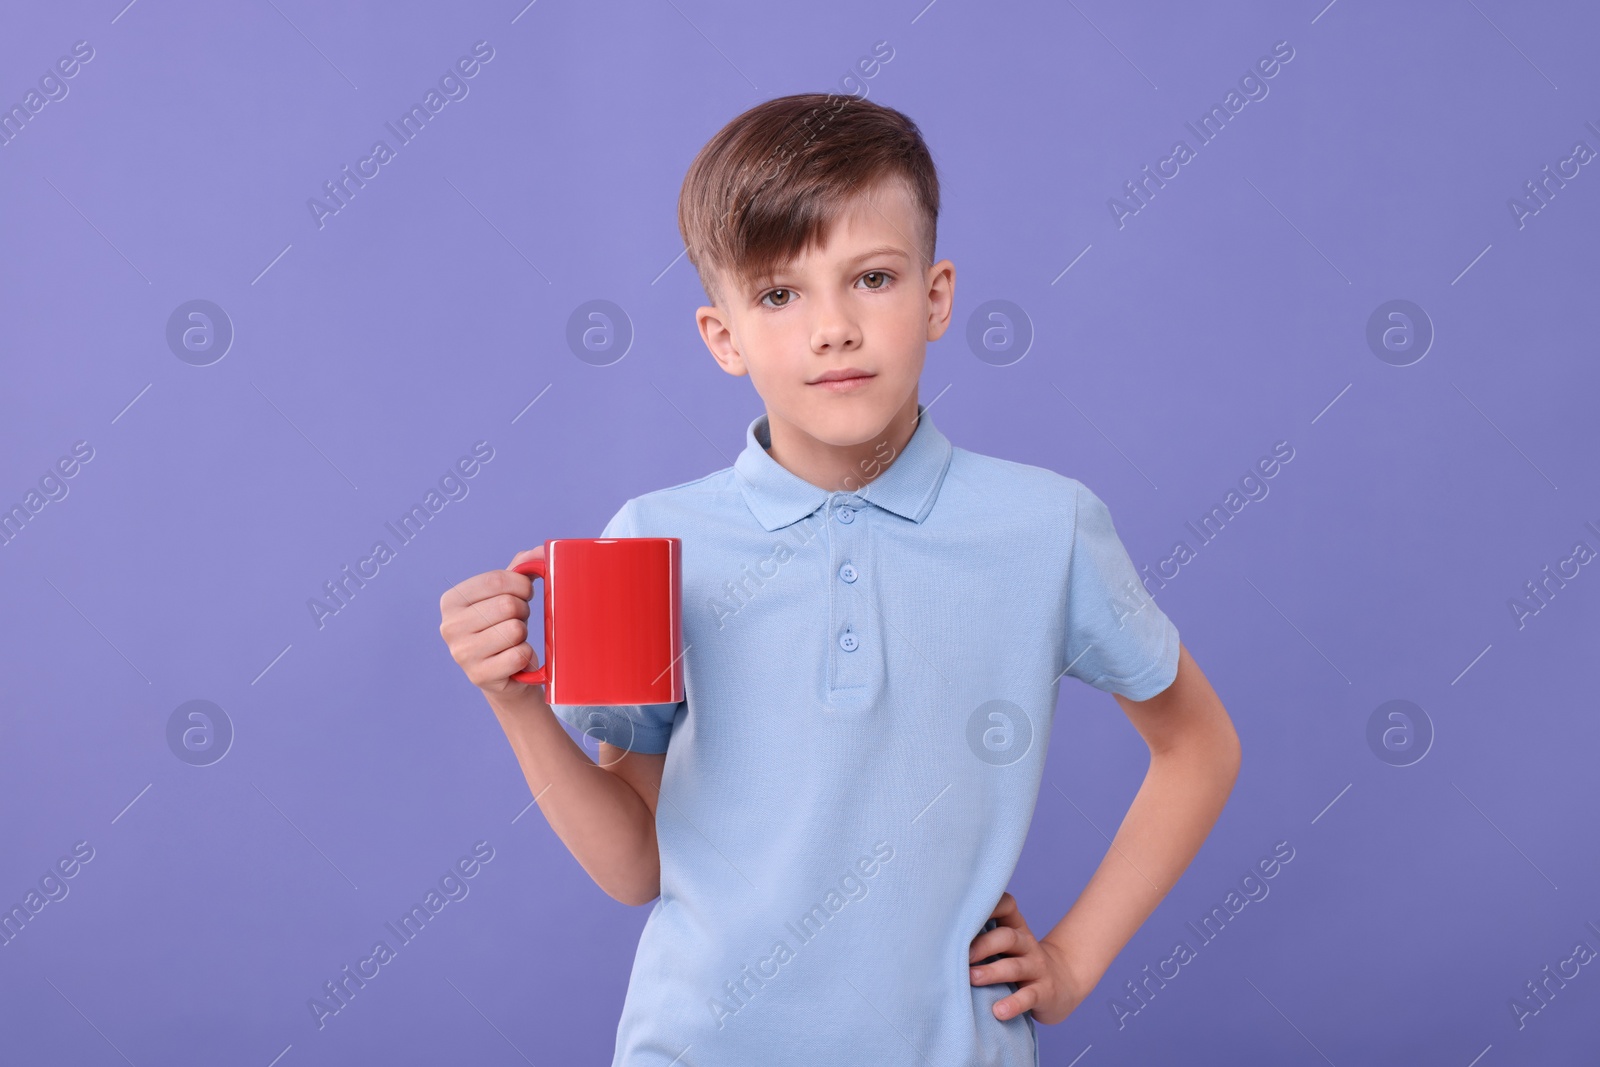 Photo of Cute boy with red ceramic mug on violet background